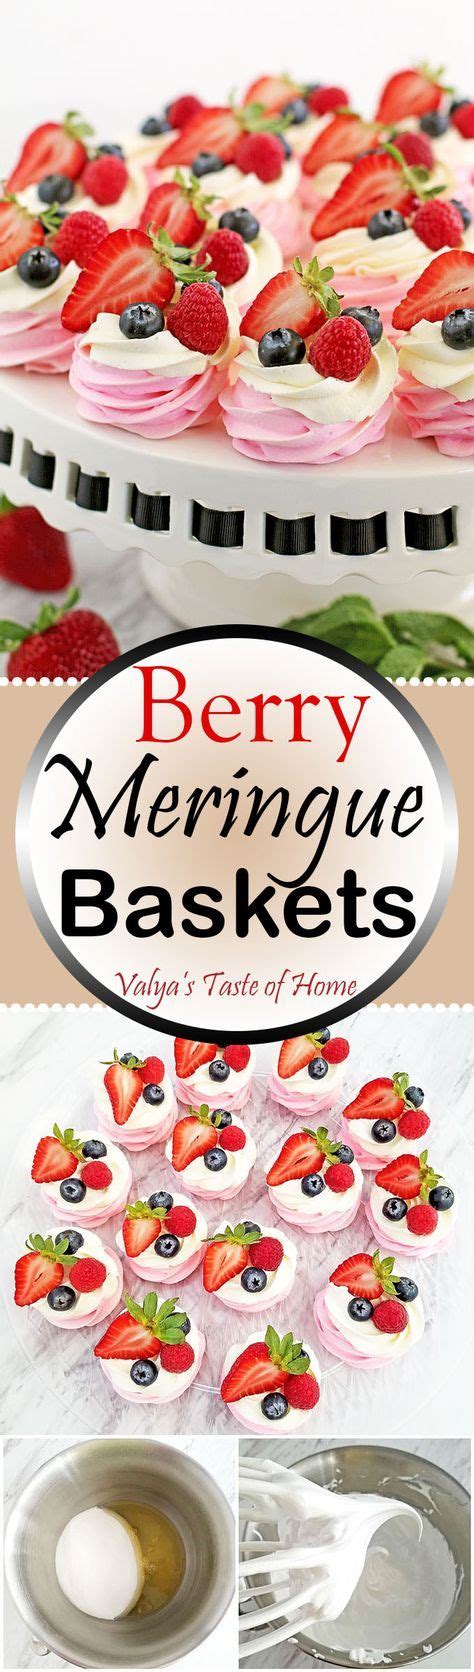 These Berry Meringue Baskets Recipe Look Beautiful On The